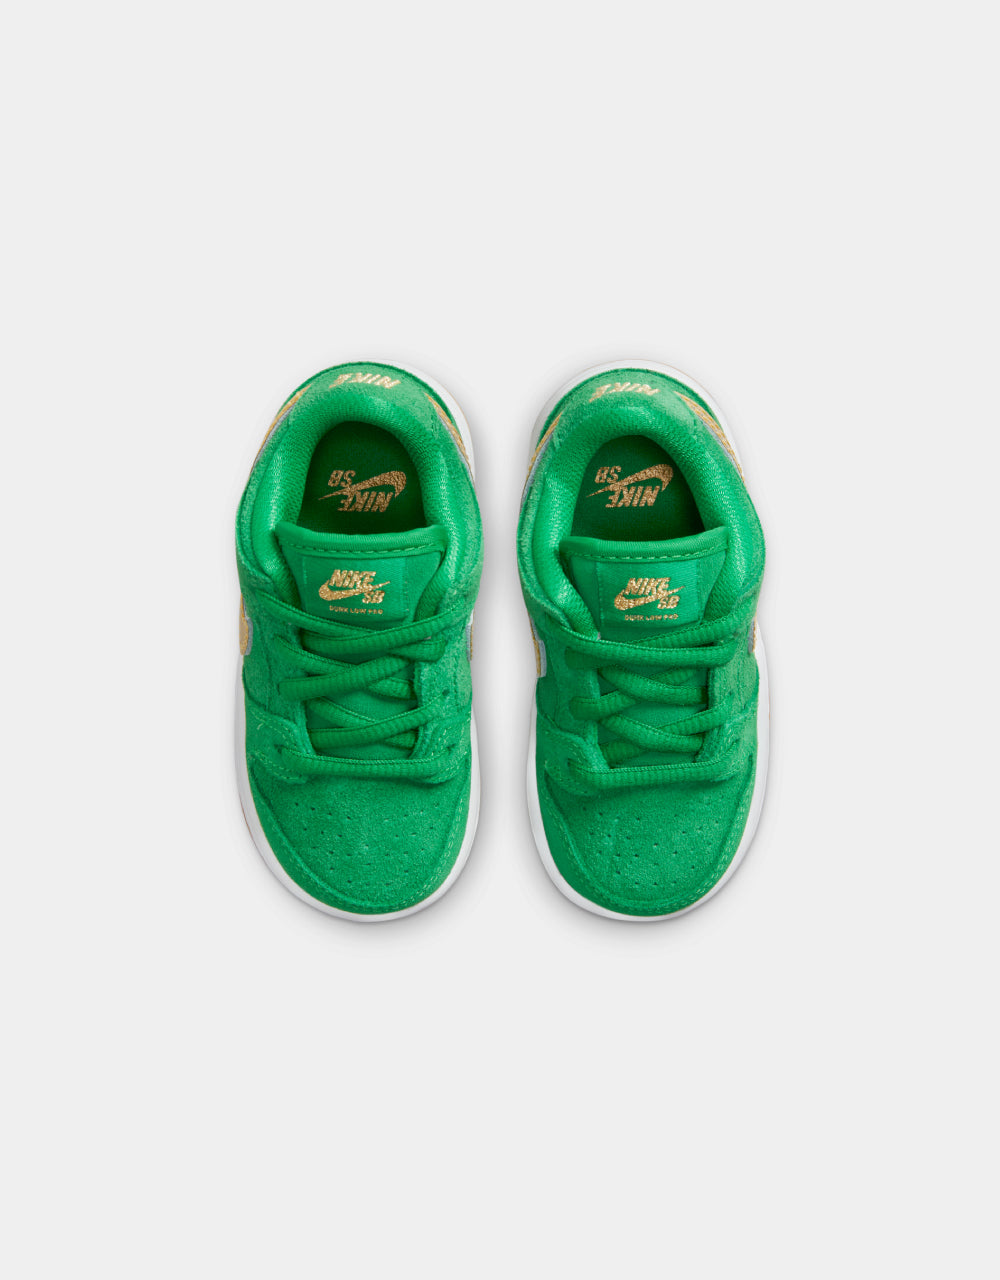 Nike SB 'Lucky' Dunk Low Pro TD Skate Shoes